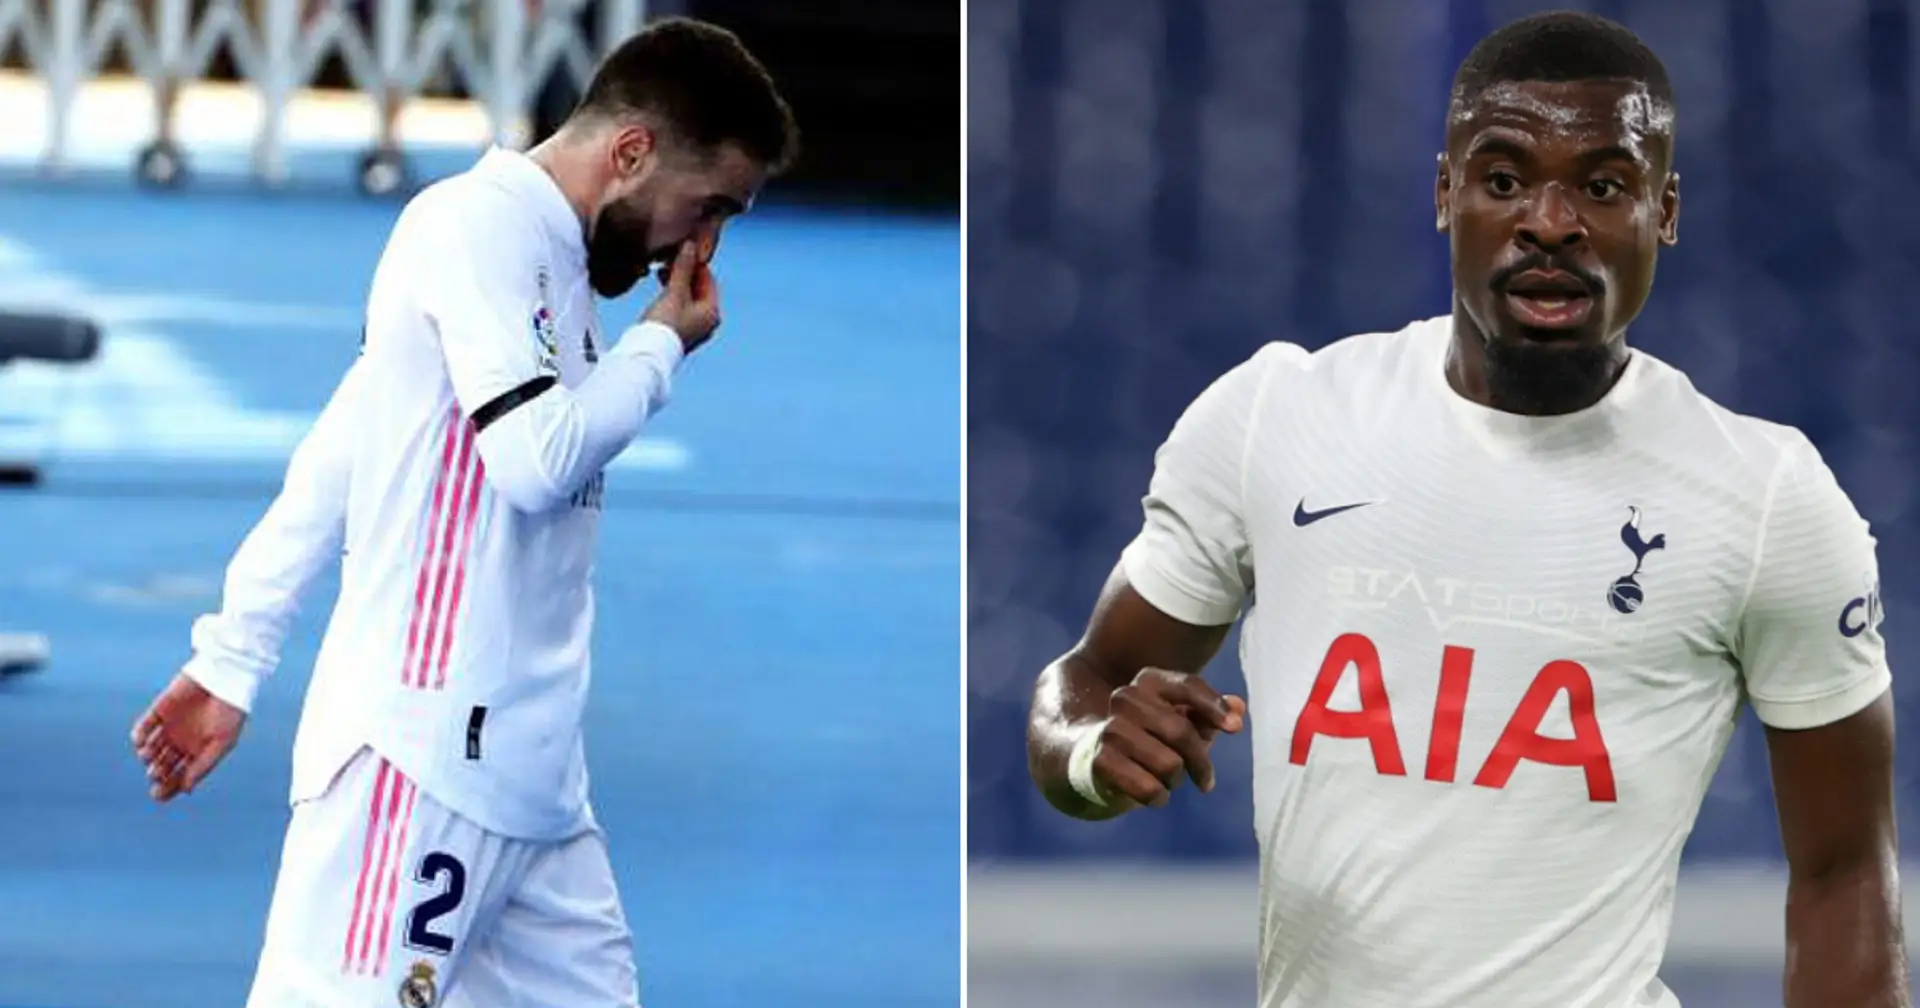 Real Madrid keen on Ex-Tottenham defender Aurier as right-back cover (reliability: 4 stars)